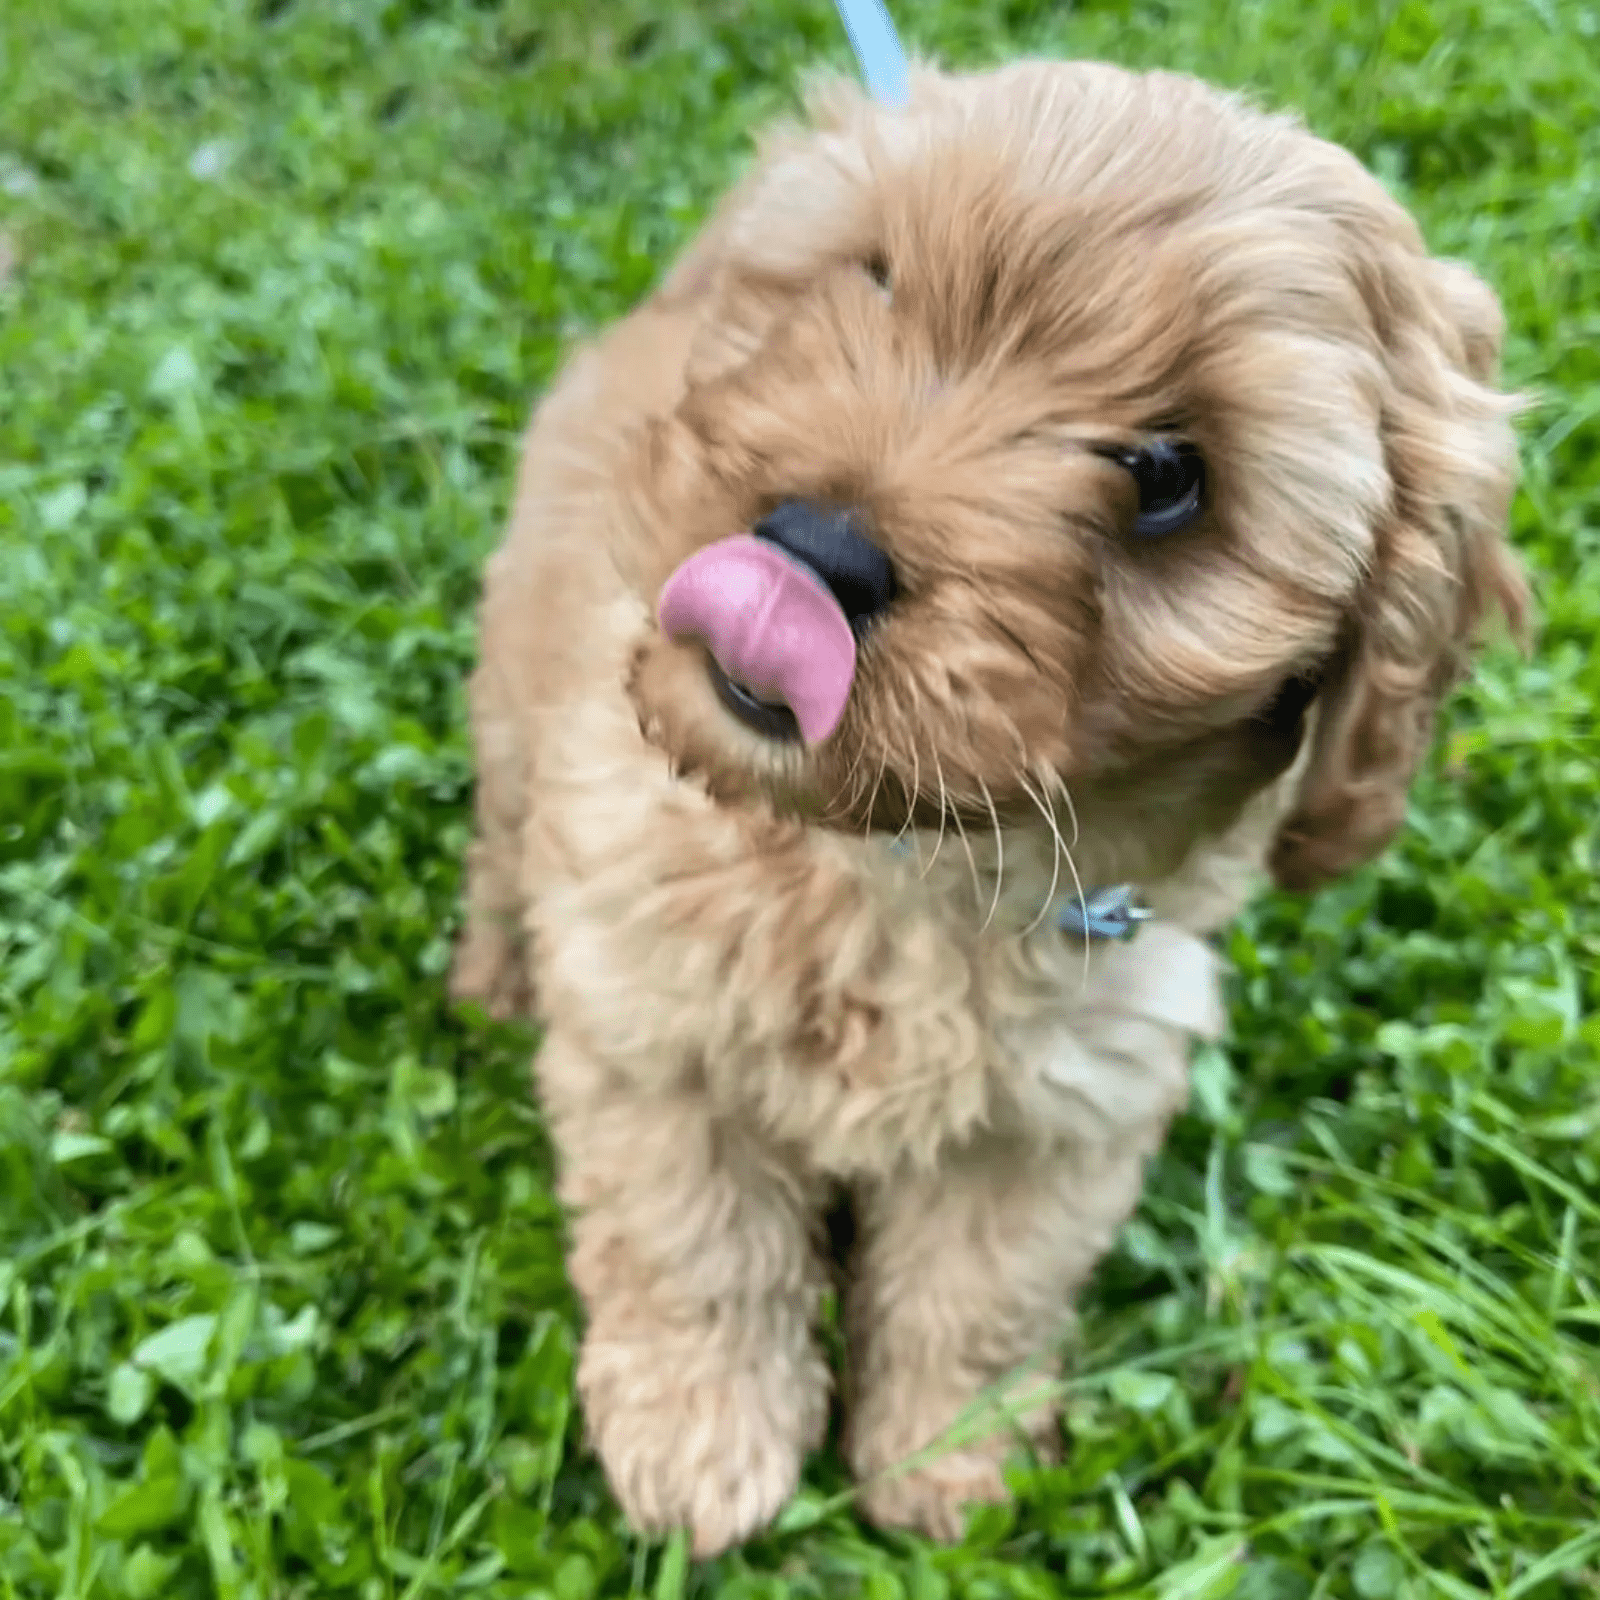 A caramel cavoodle named Dolly standing outside in grass while licking their nose